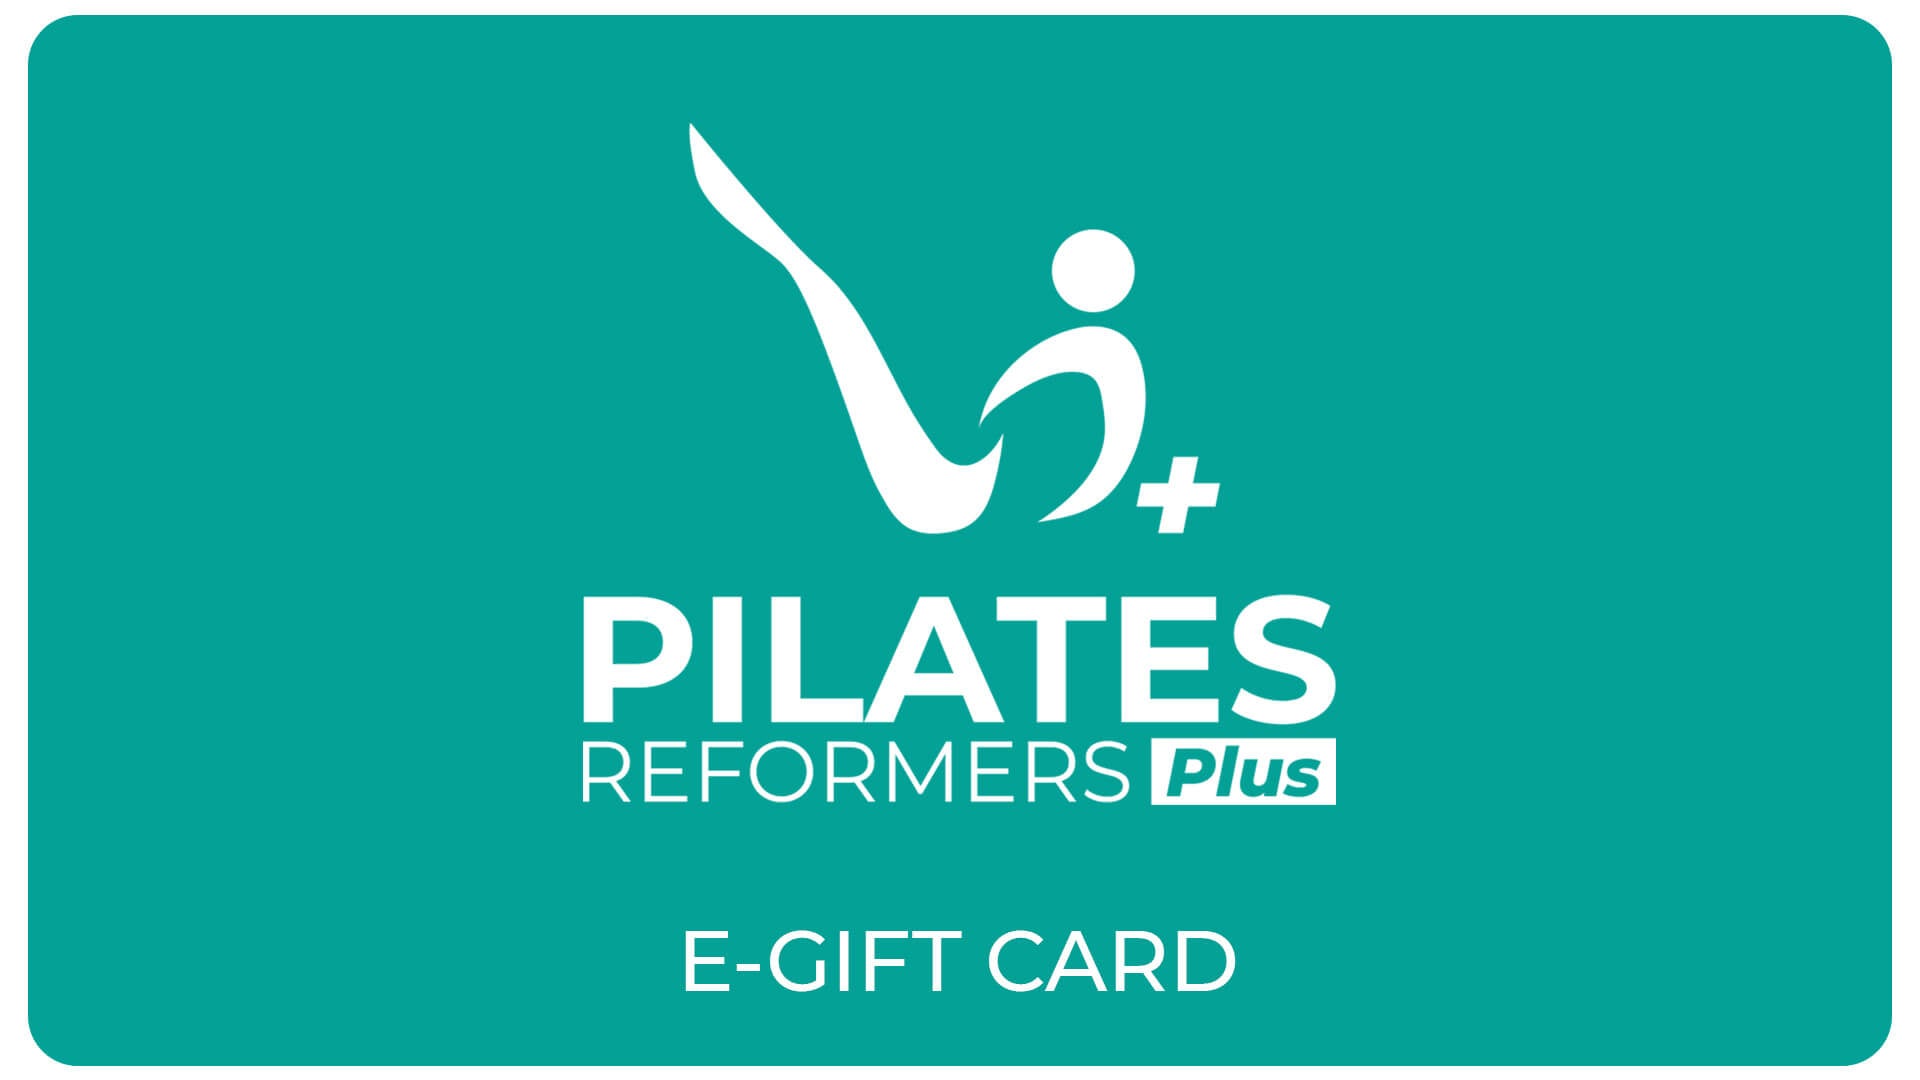 E-Gift Card for Pilates Reformers & Equipment – Pilates Reformers Plus